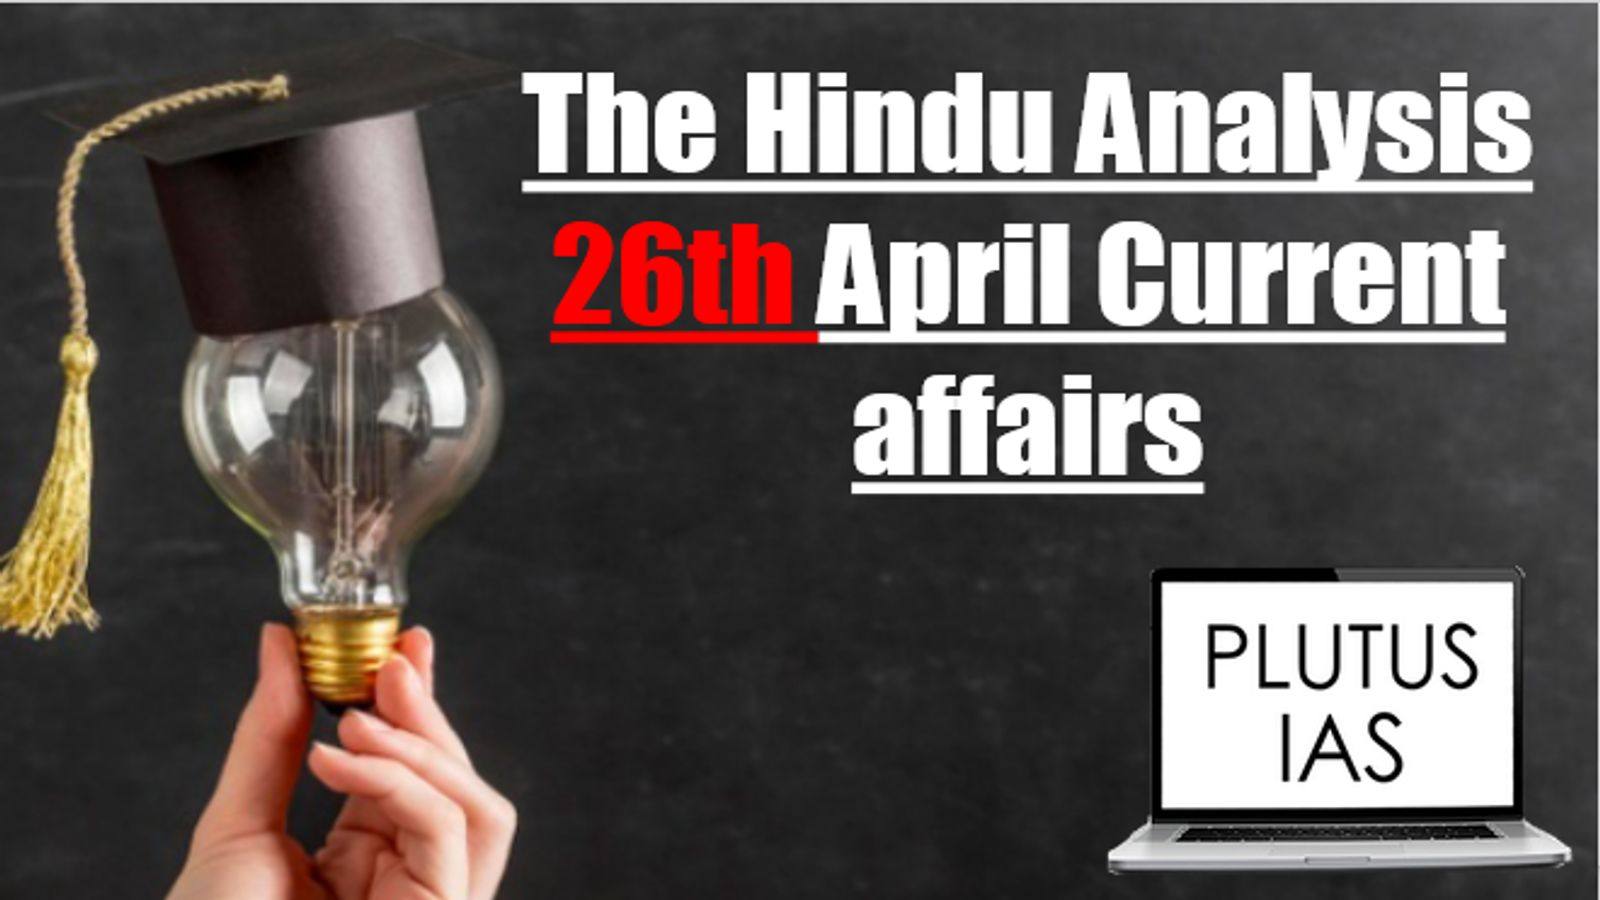 Today Current Affairs 26th April